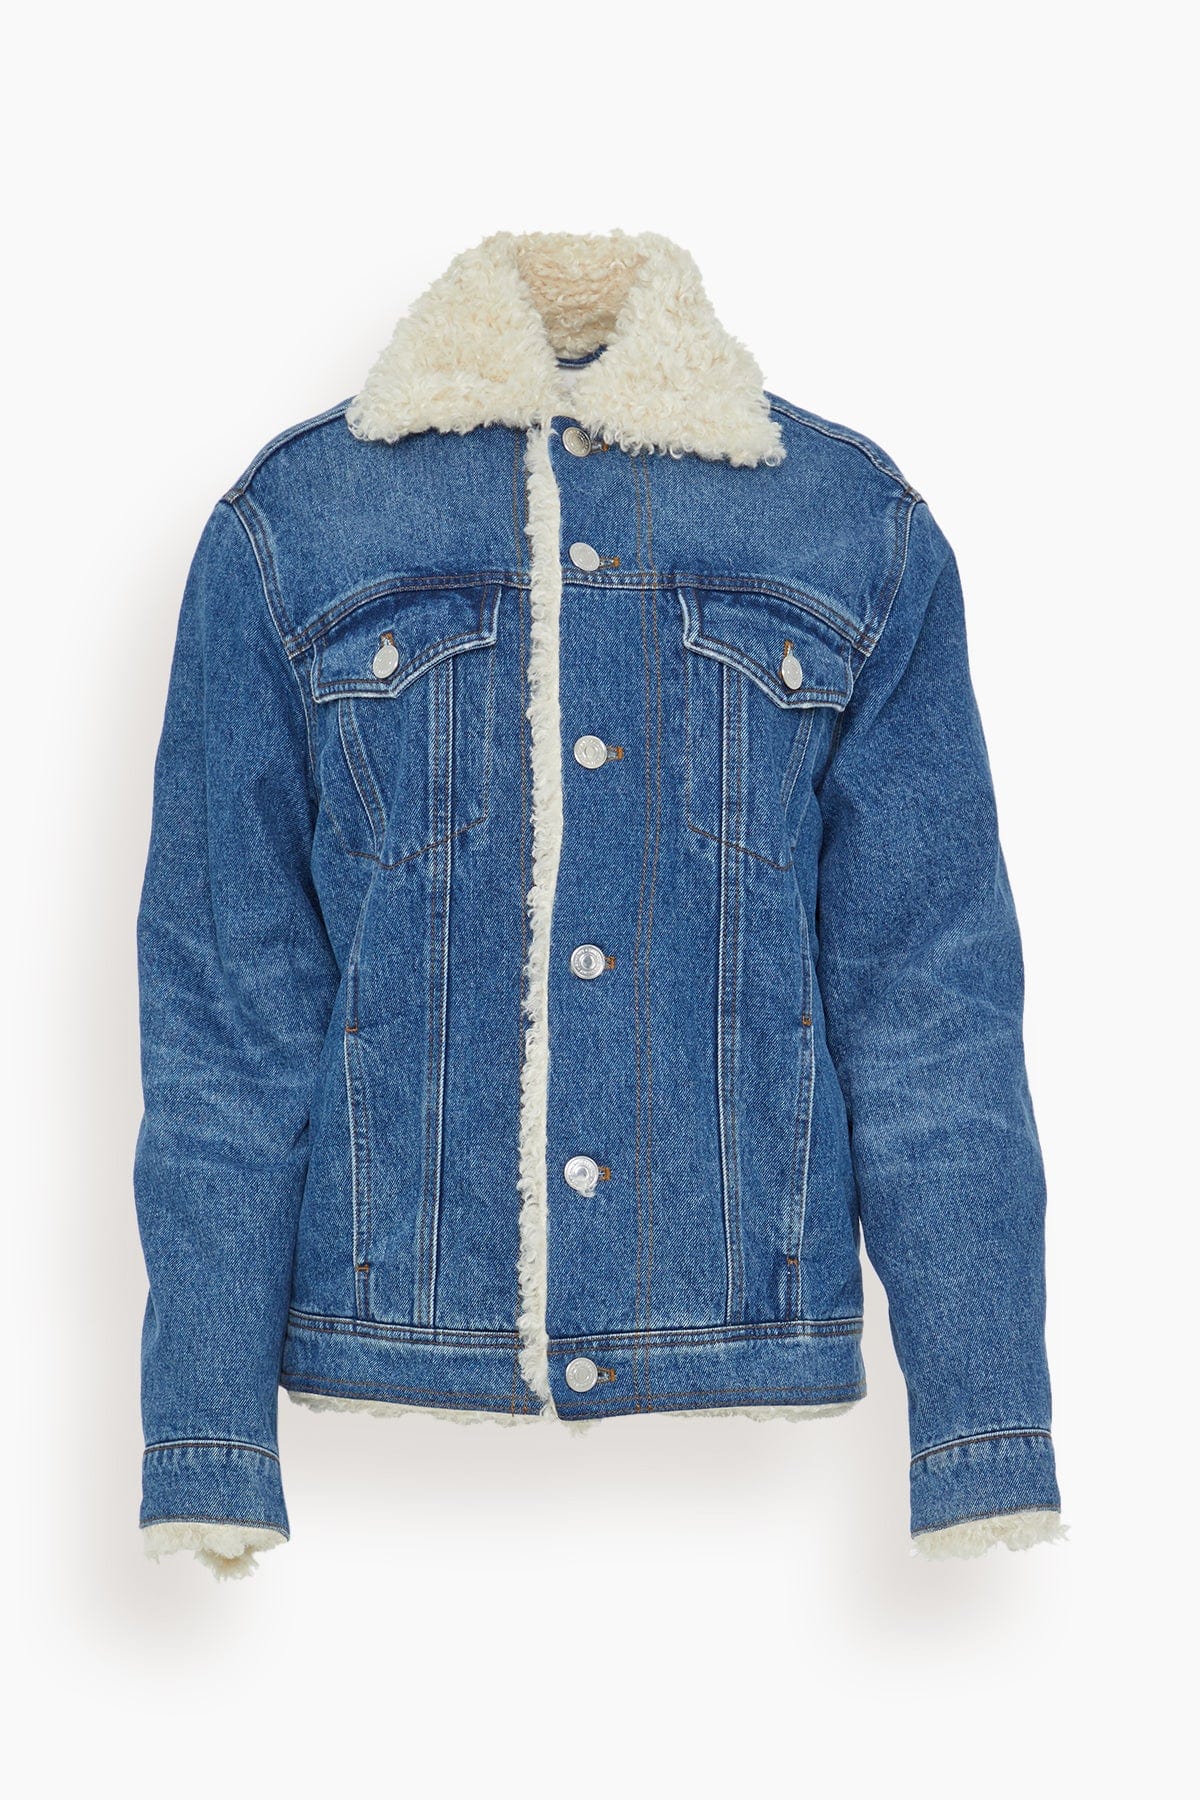 Ami Paris Jackets Trucker Jacket Lined with Synthetic Fur in Used Blue